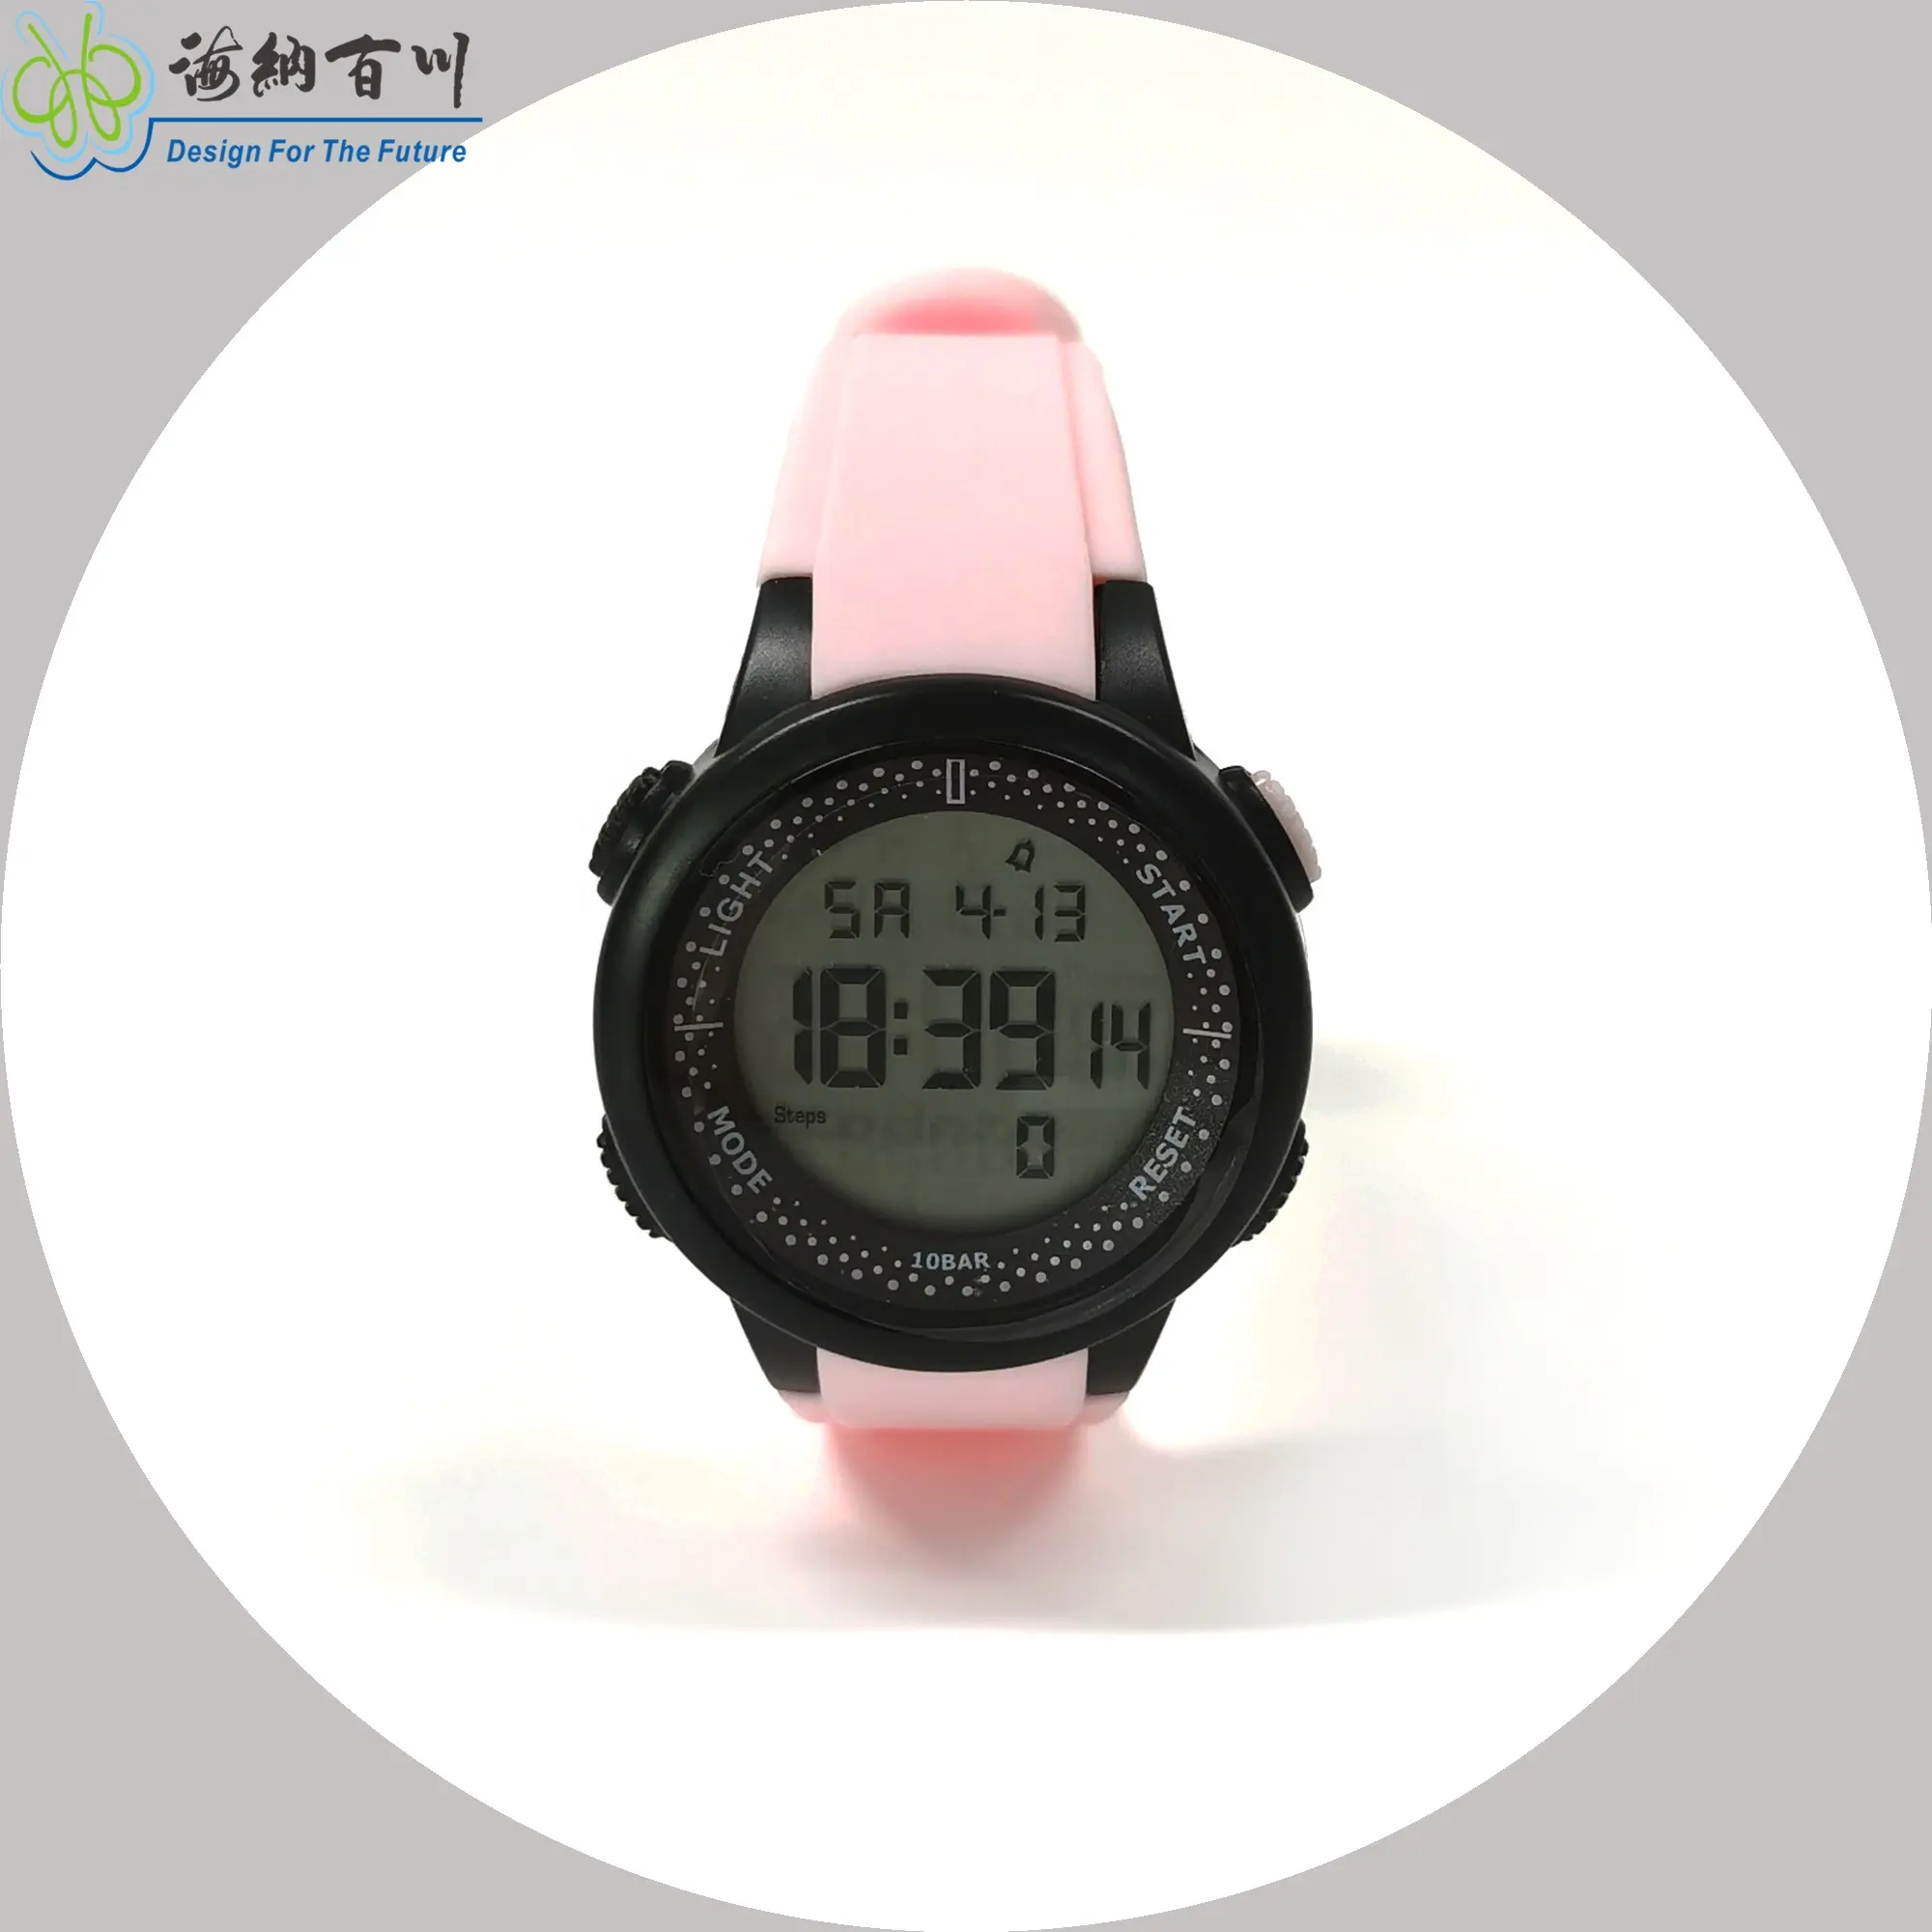 lady chronograph Digital China Auto Date LED Display Complete Calendar sport Stop Watch Led Watch Rubber Wrist watch